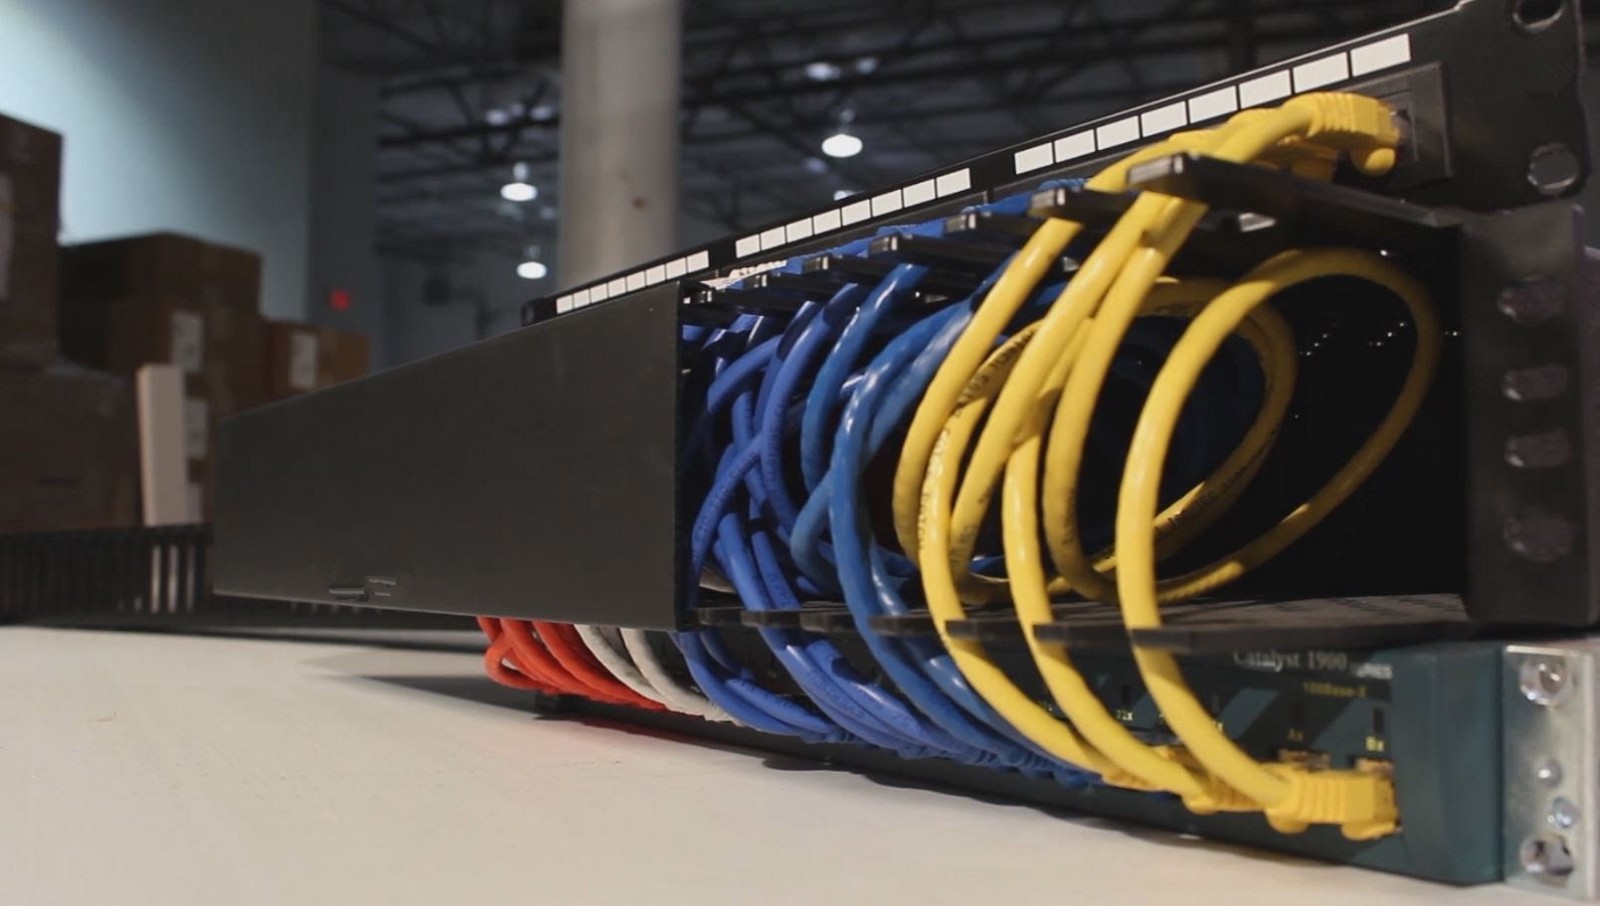 Cable Manager Market Size, Forecast Report, 2019-2024